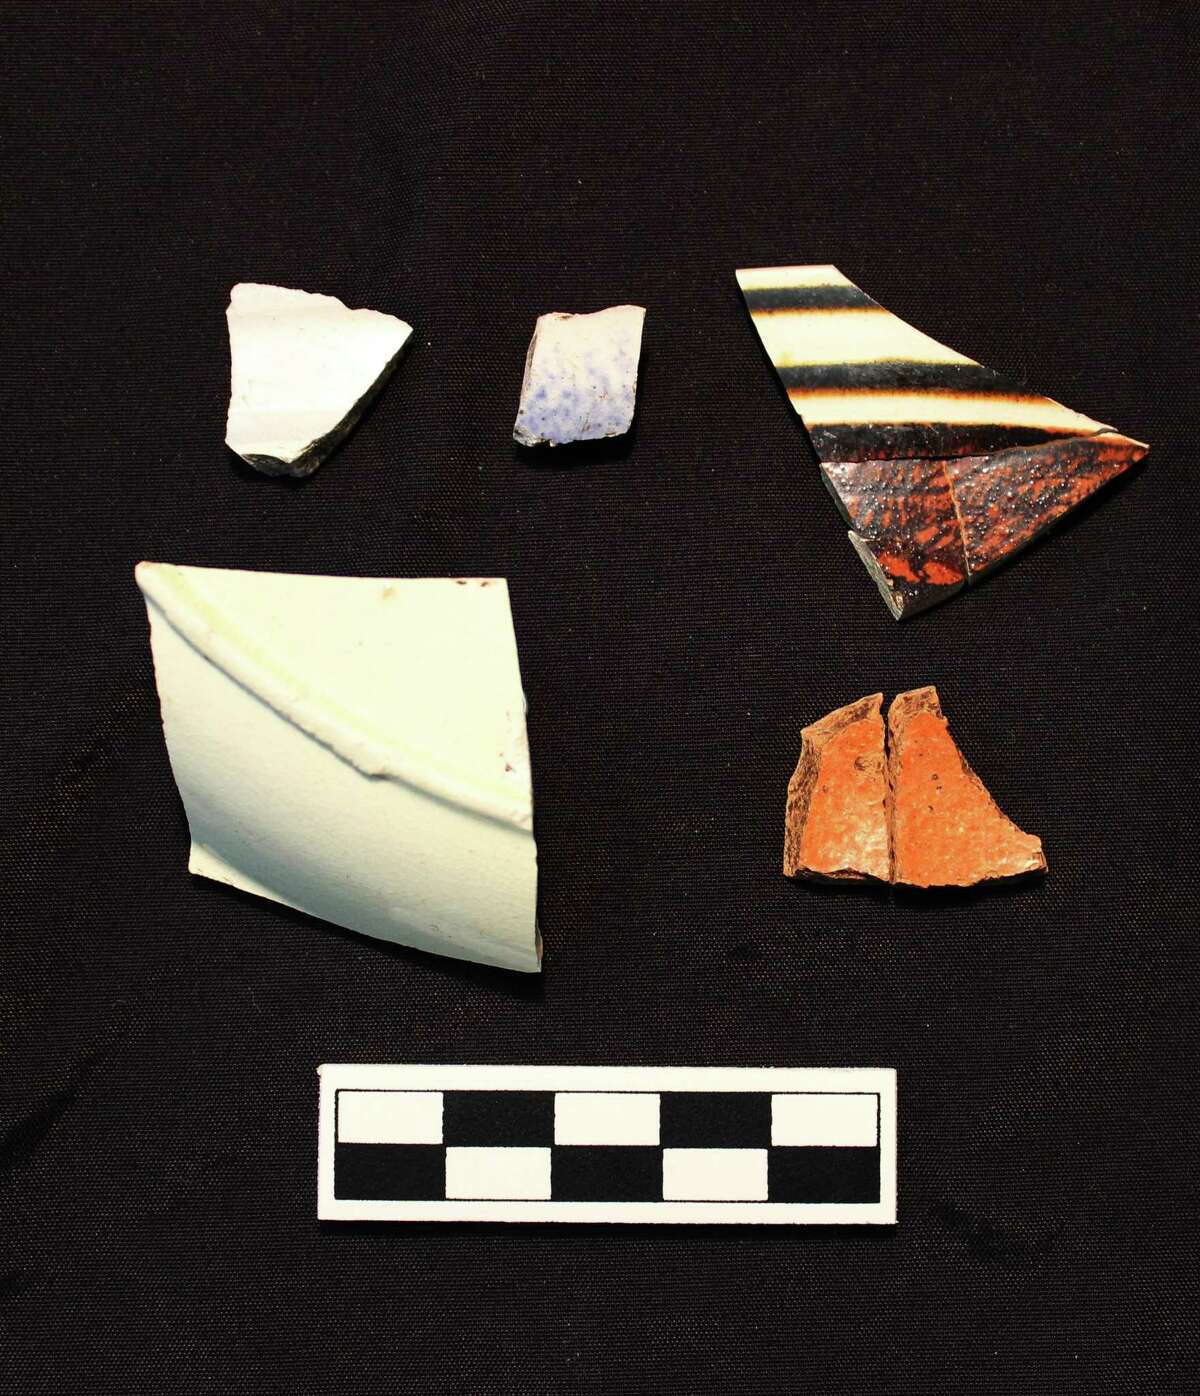 Various types of ceramics, possibly from the early 1800s, were also found in City Cemetery No. 2, providing further evidence of the site of the powder house and three-story watch tower that sat on a hill when the Mission San Antonio de Valero was first being used as a military fortress and later the Alamo -- site of the famous siege and battle for Texas independence in 1836.